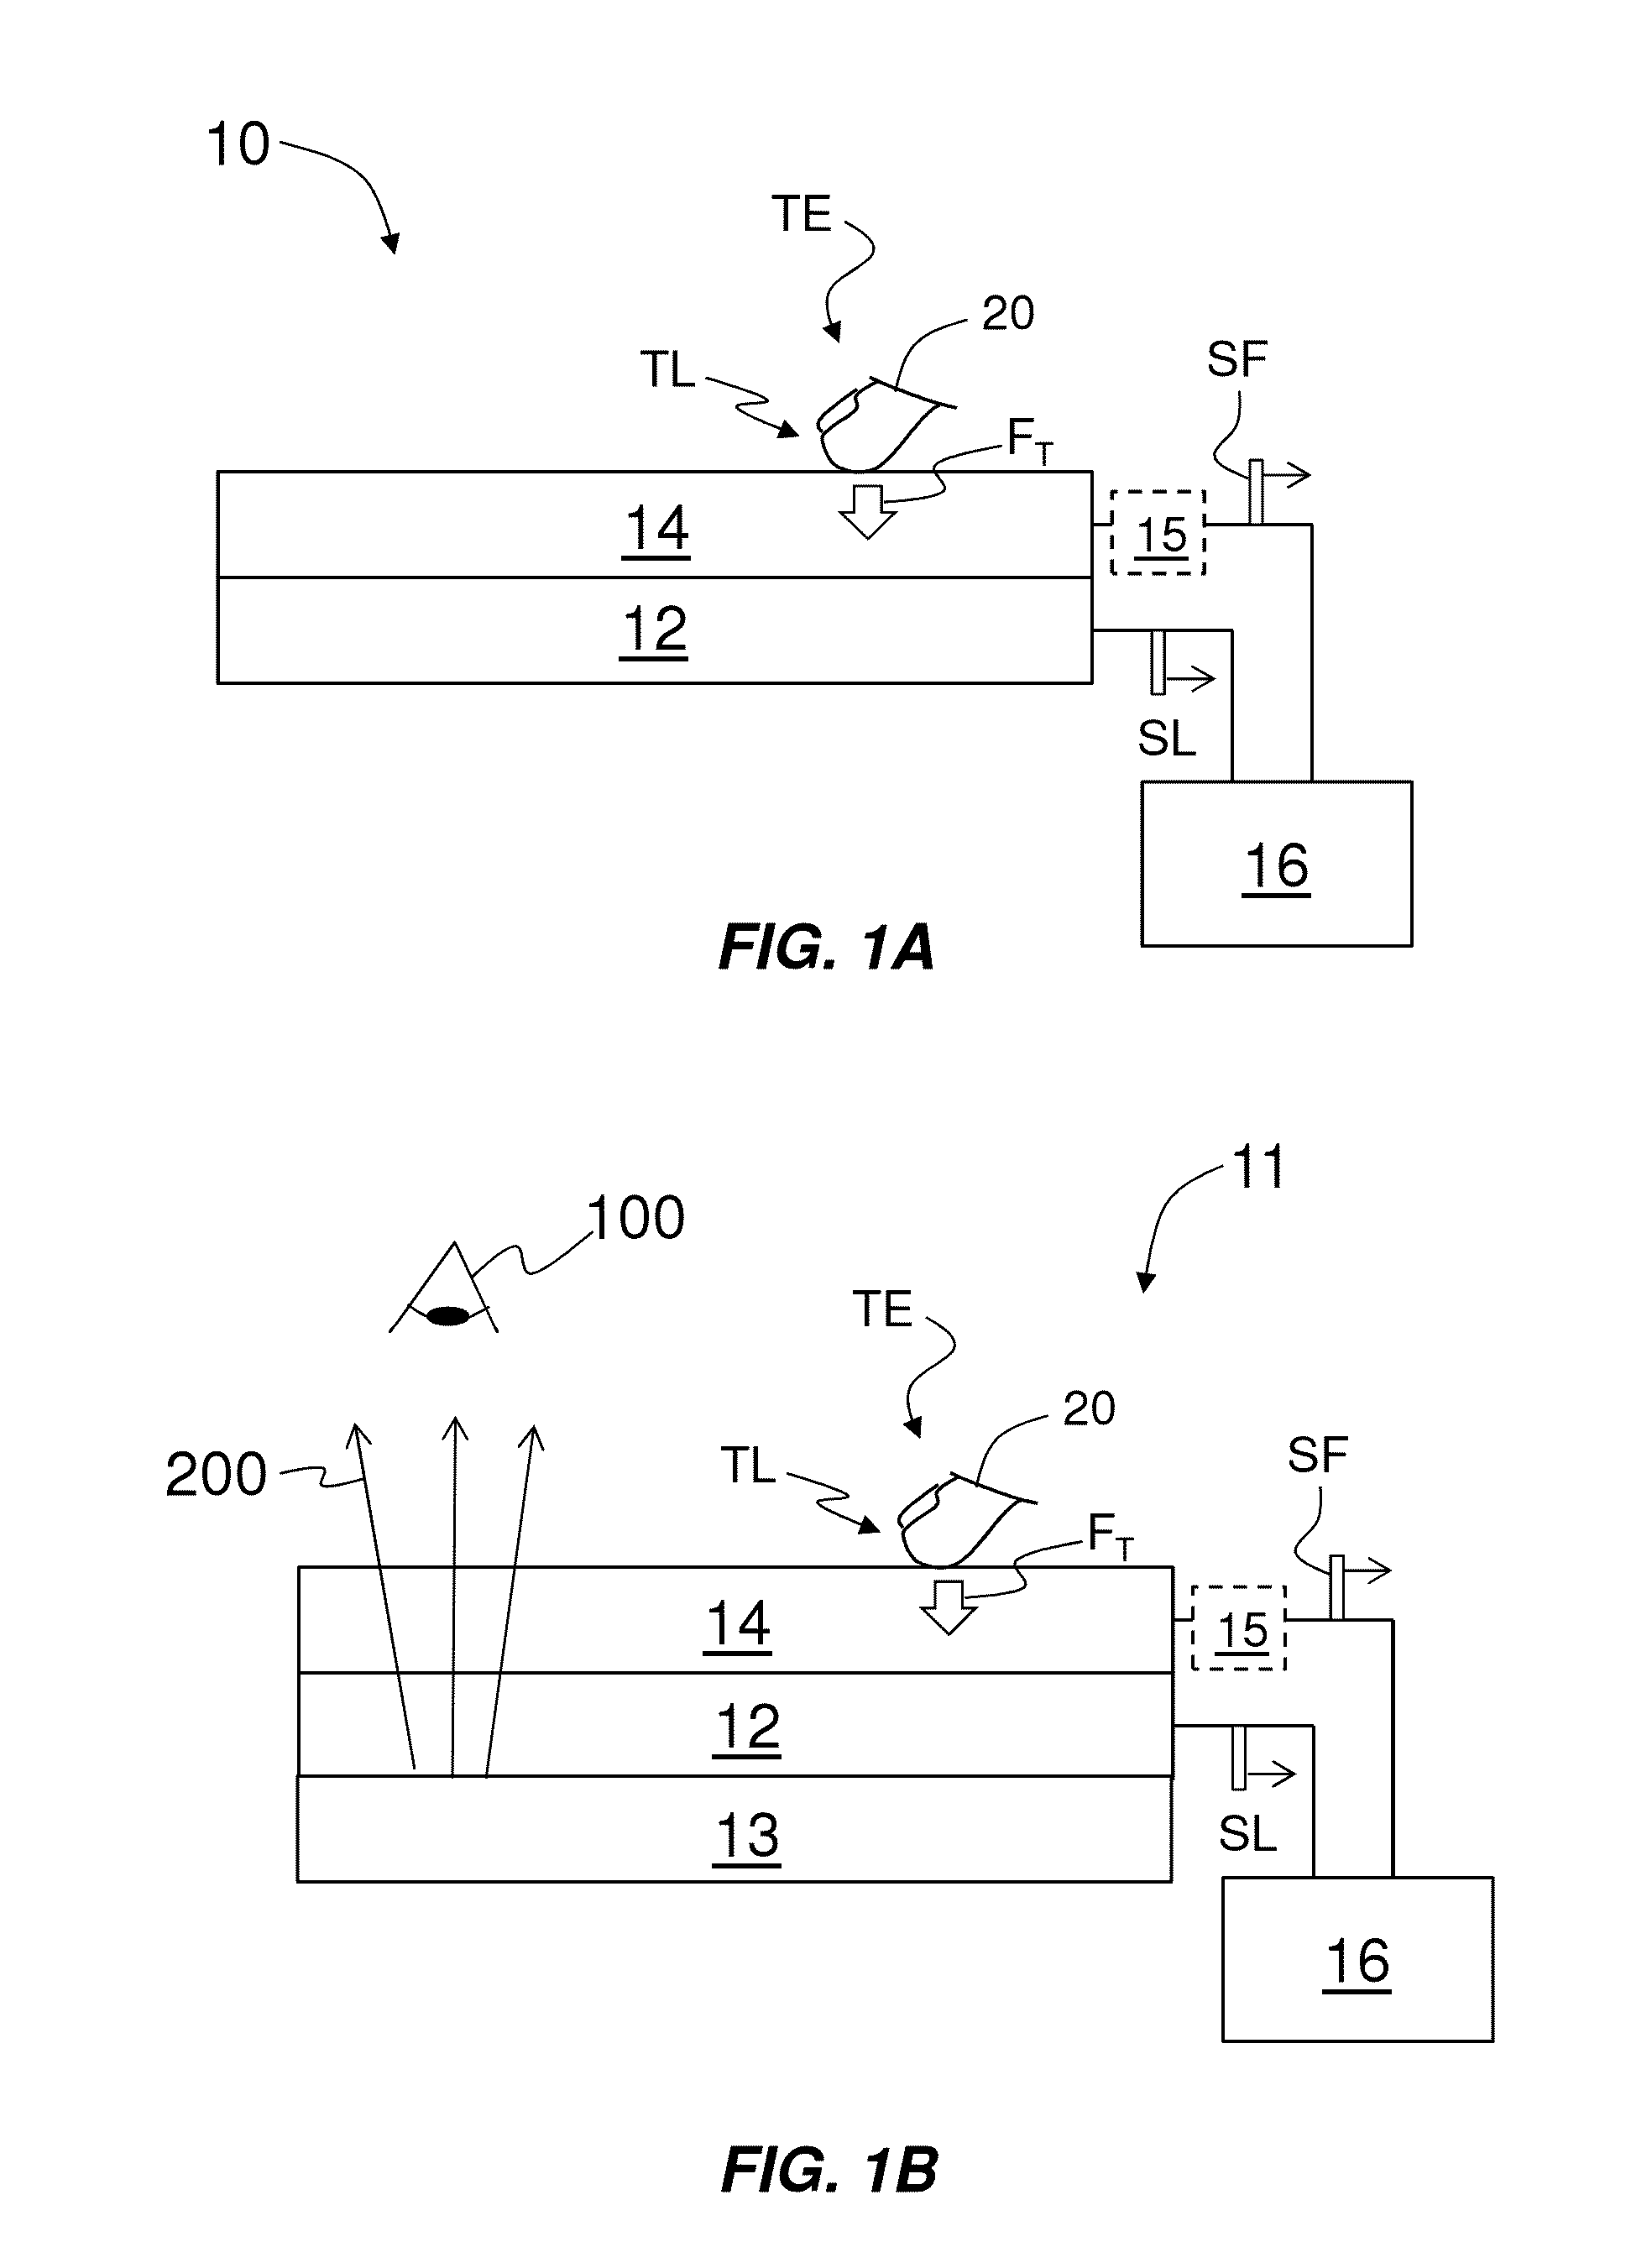 Touch screen systems and methods based on touch location and touch force